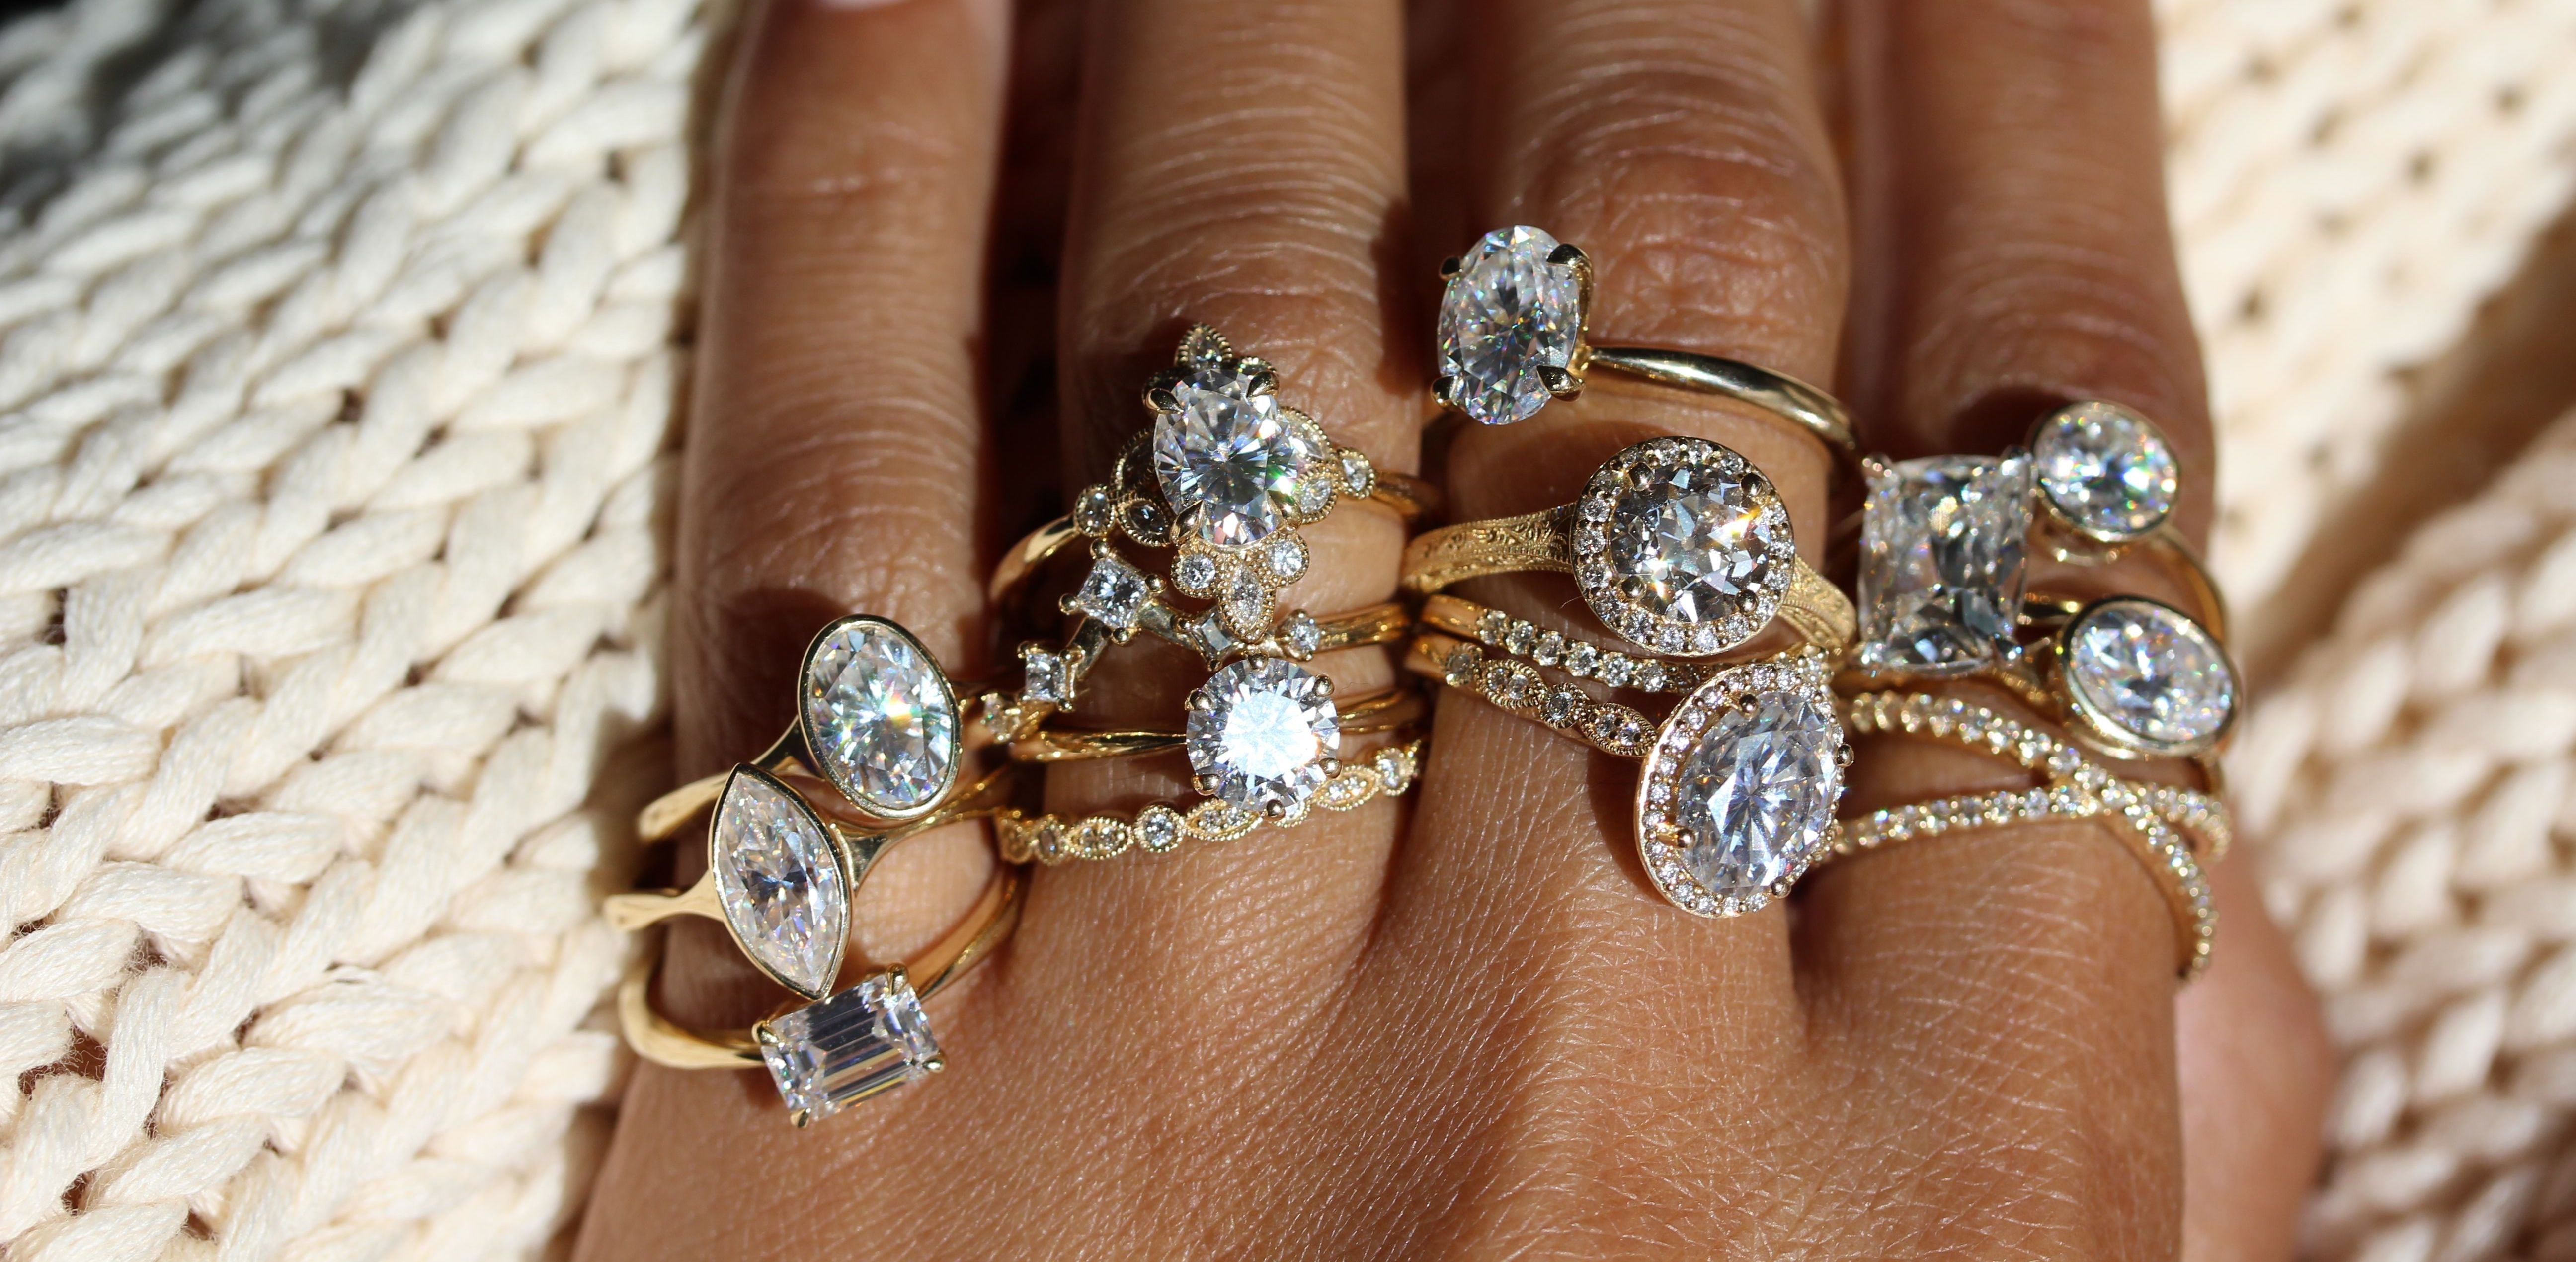 7 Unique Ways To Show Off Your Engagement Ring In Your Wedding Album